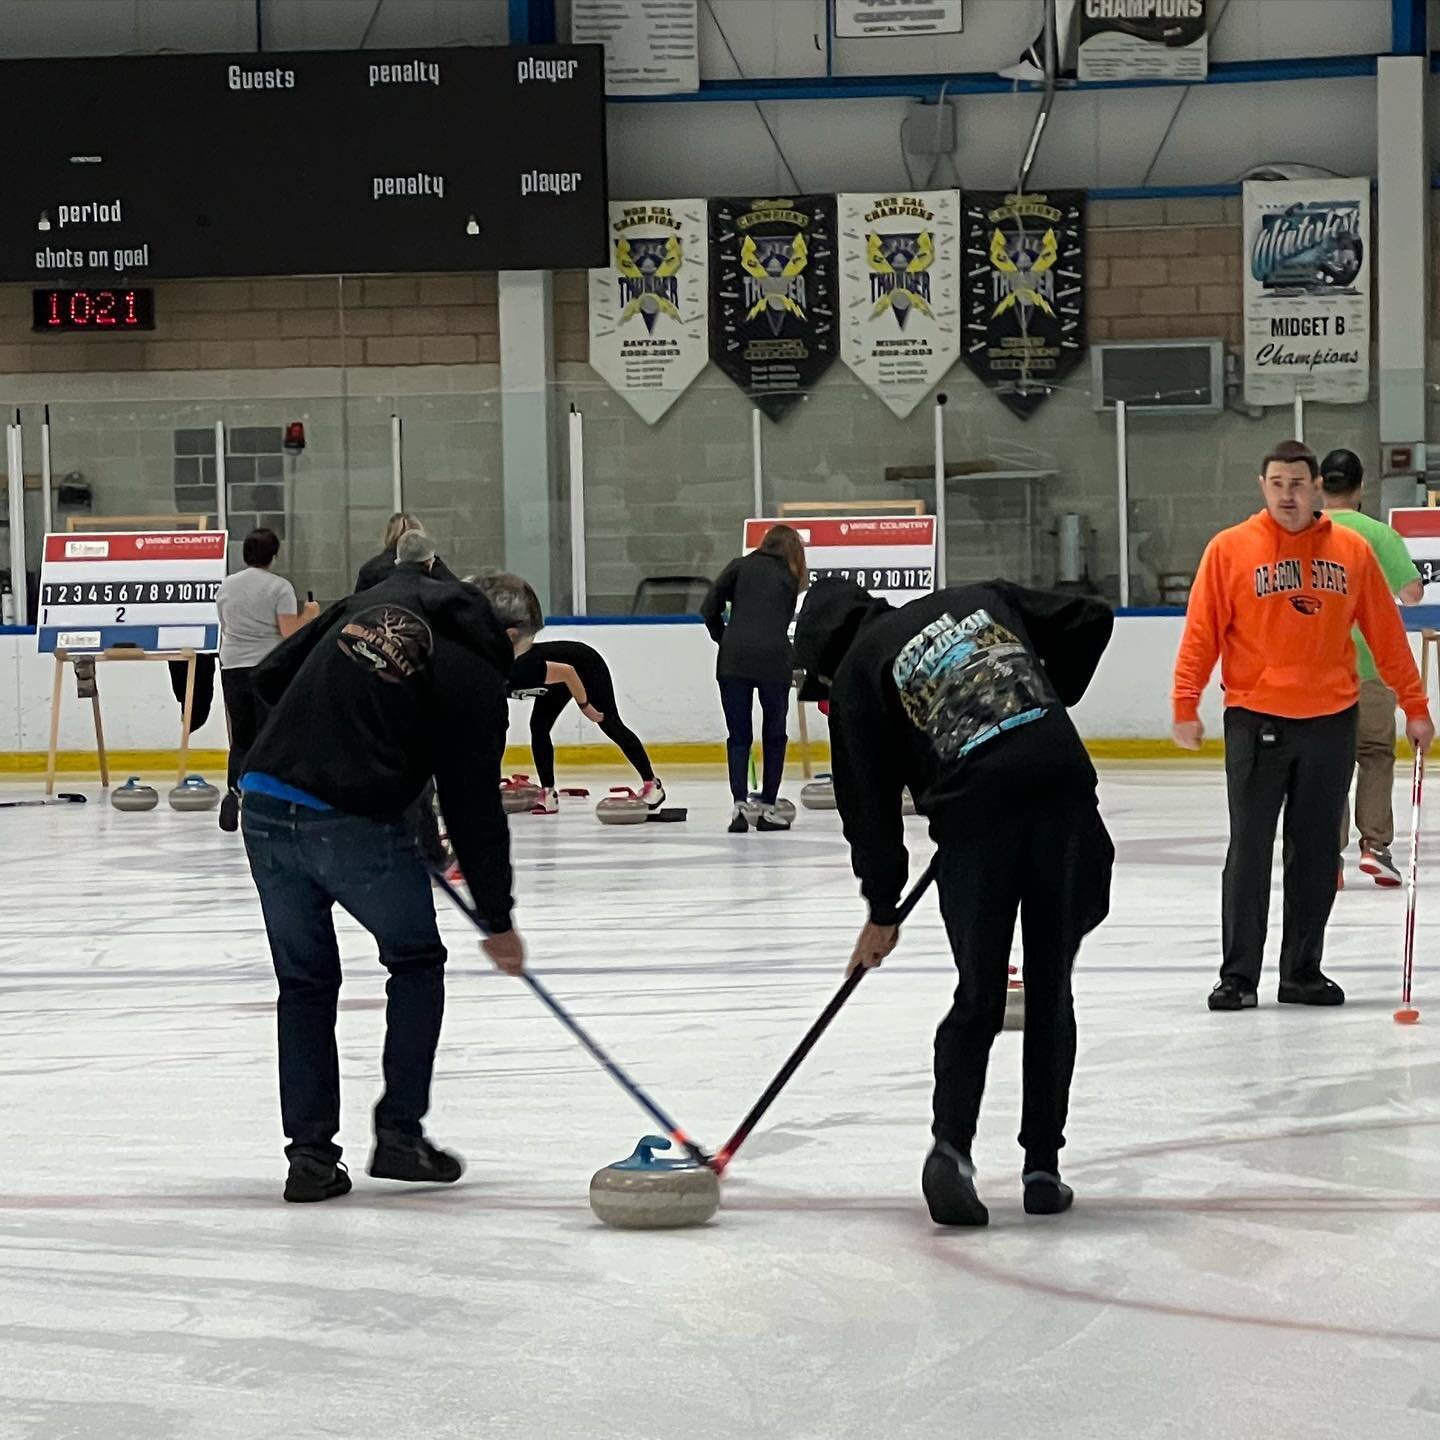 Indian Valley Brewing takes on curling! Did you know that there are 10 ends played in a traditional curling game? Fun facts like this are great to know for Thursday night trivia games at IVB!

#indianvalley #indianvalleybrewing #brewery #craftbeer #b